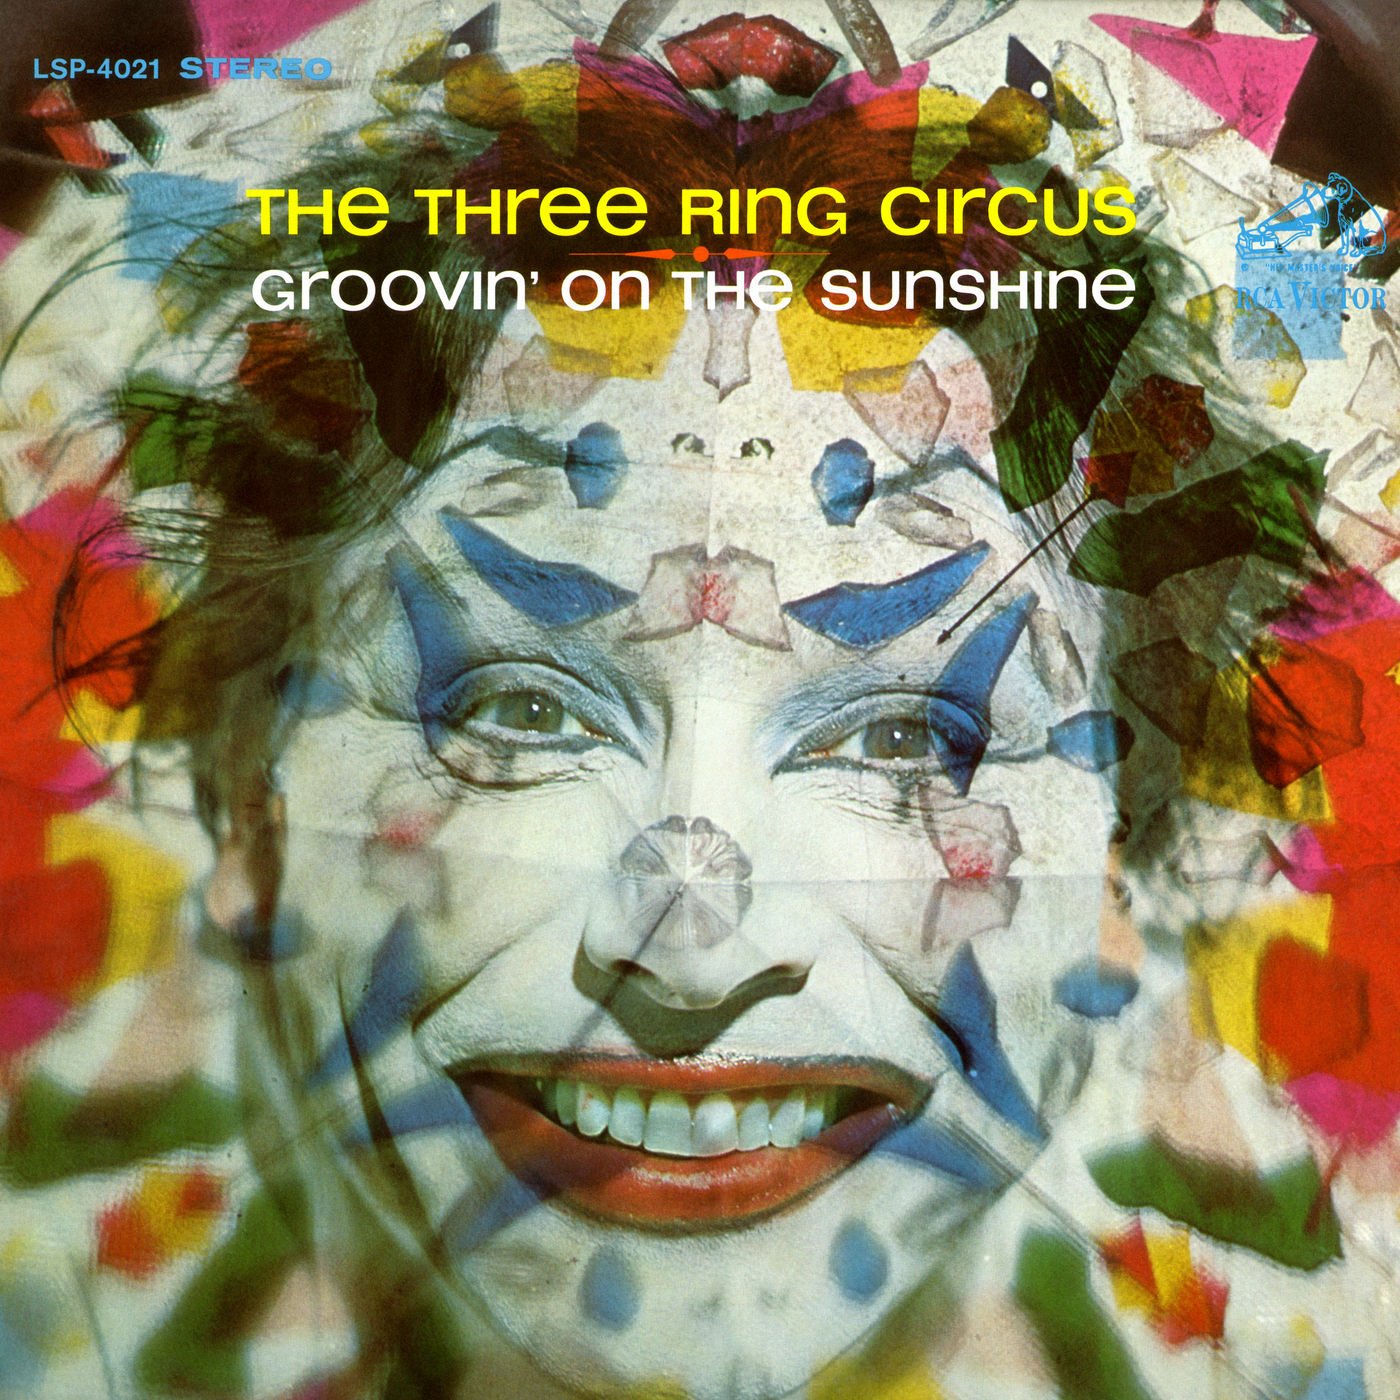 The Three Ring Circus – Groovin’ on the Sunshine